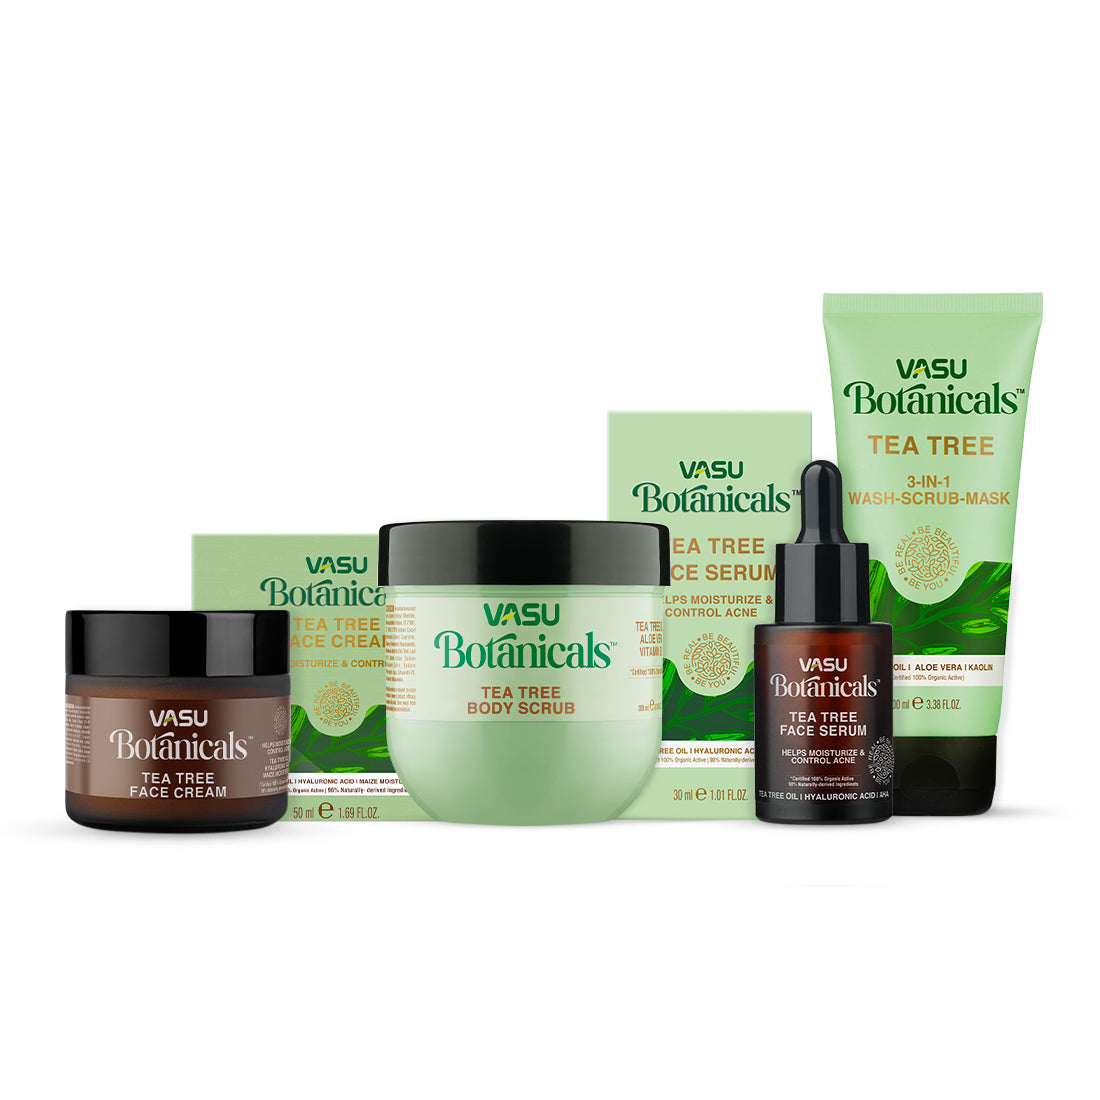 Vasu Botanicals Tea Tree Kit For Acne & Pimple - Helps to Control Acne and Fight Pimple Causing Germs - Prevent Breakouts & Blemishes - VasuStore